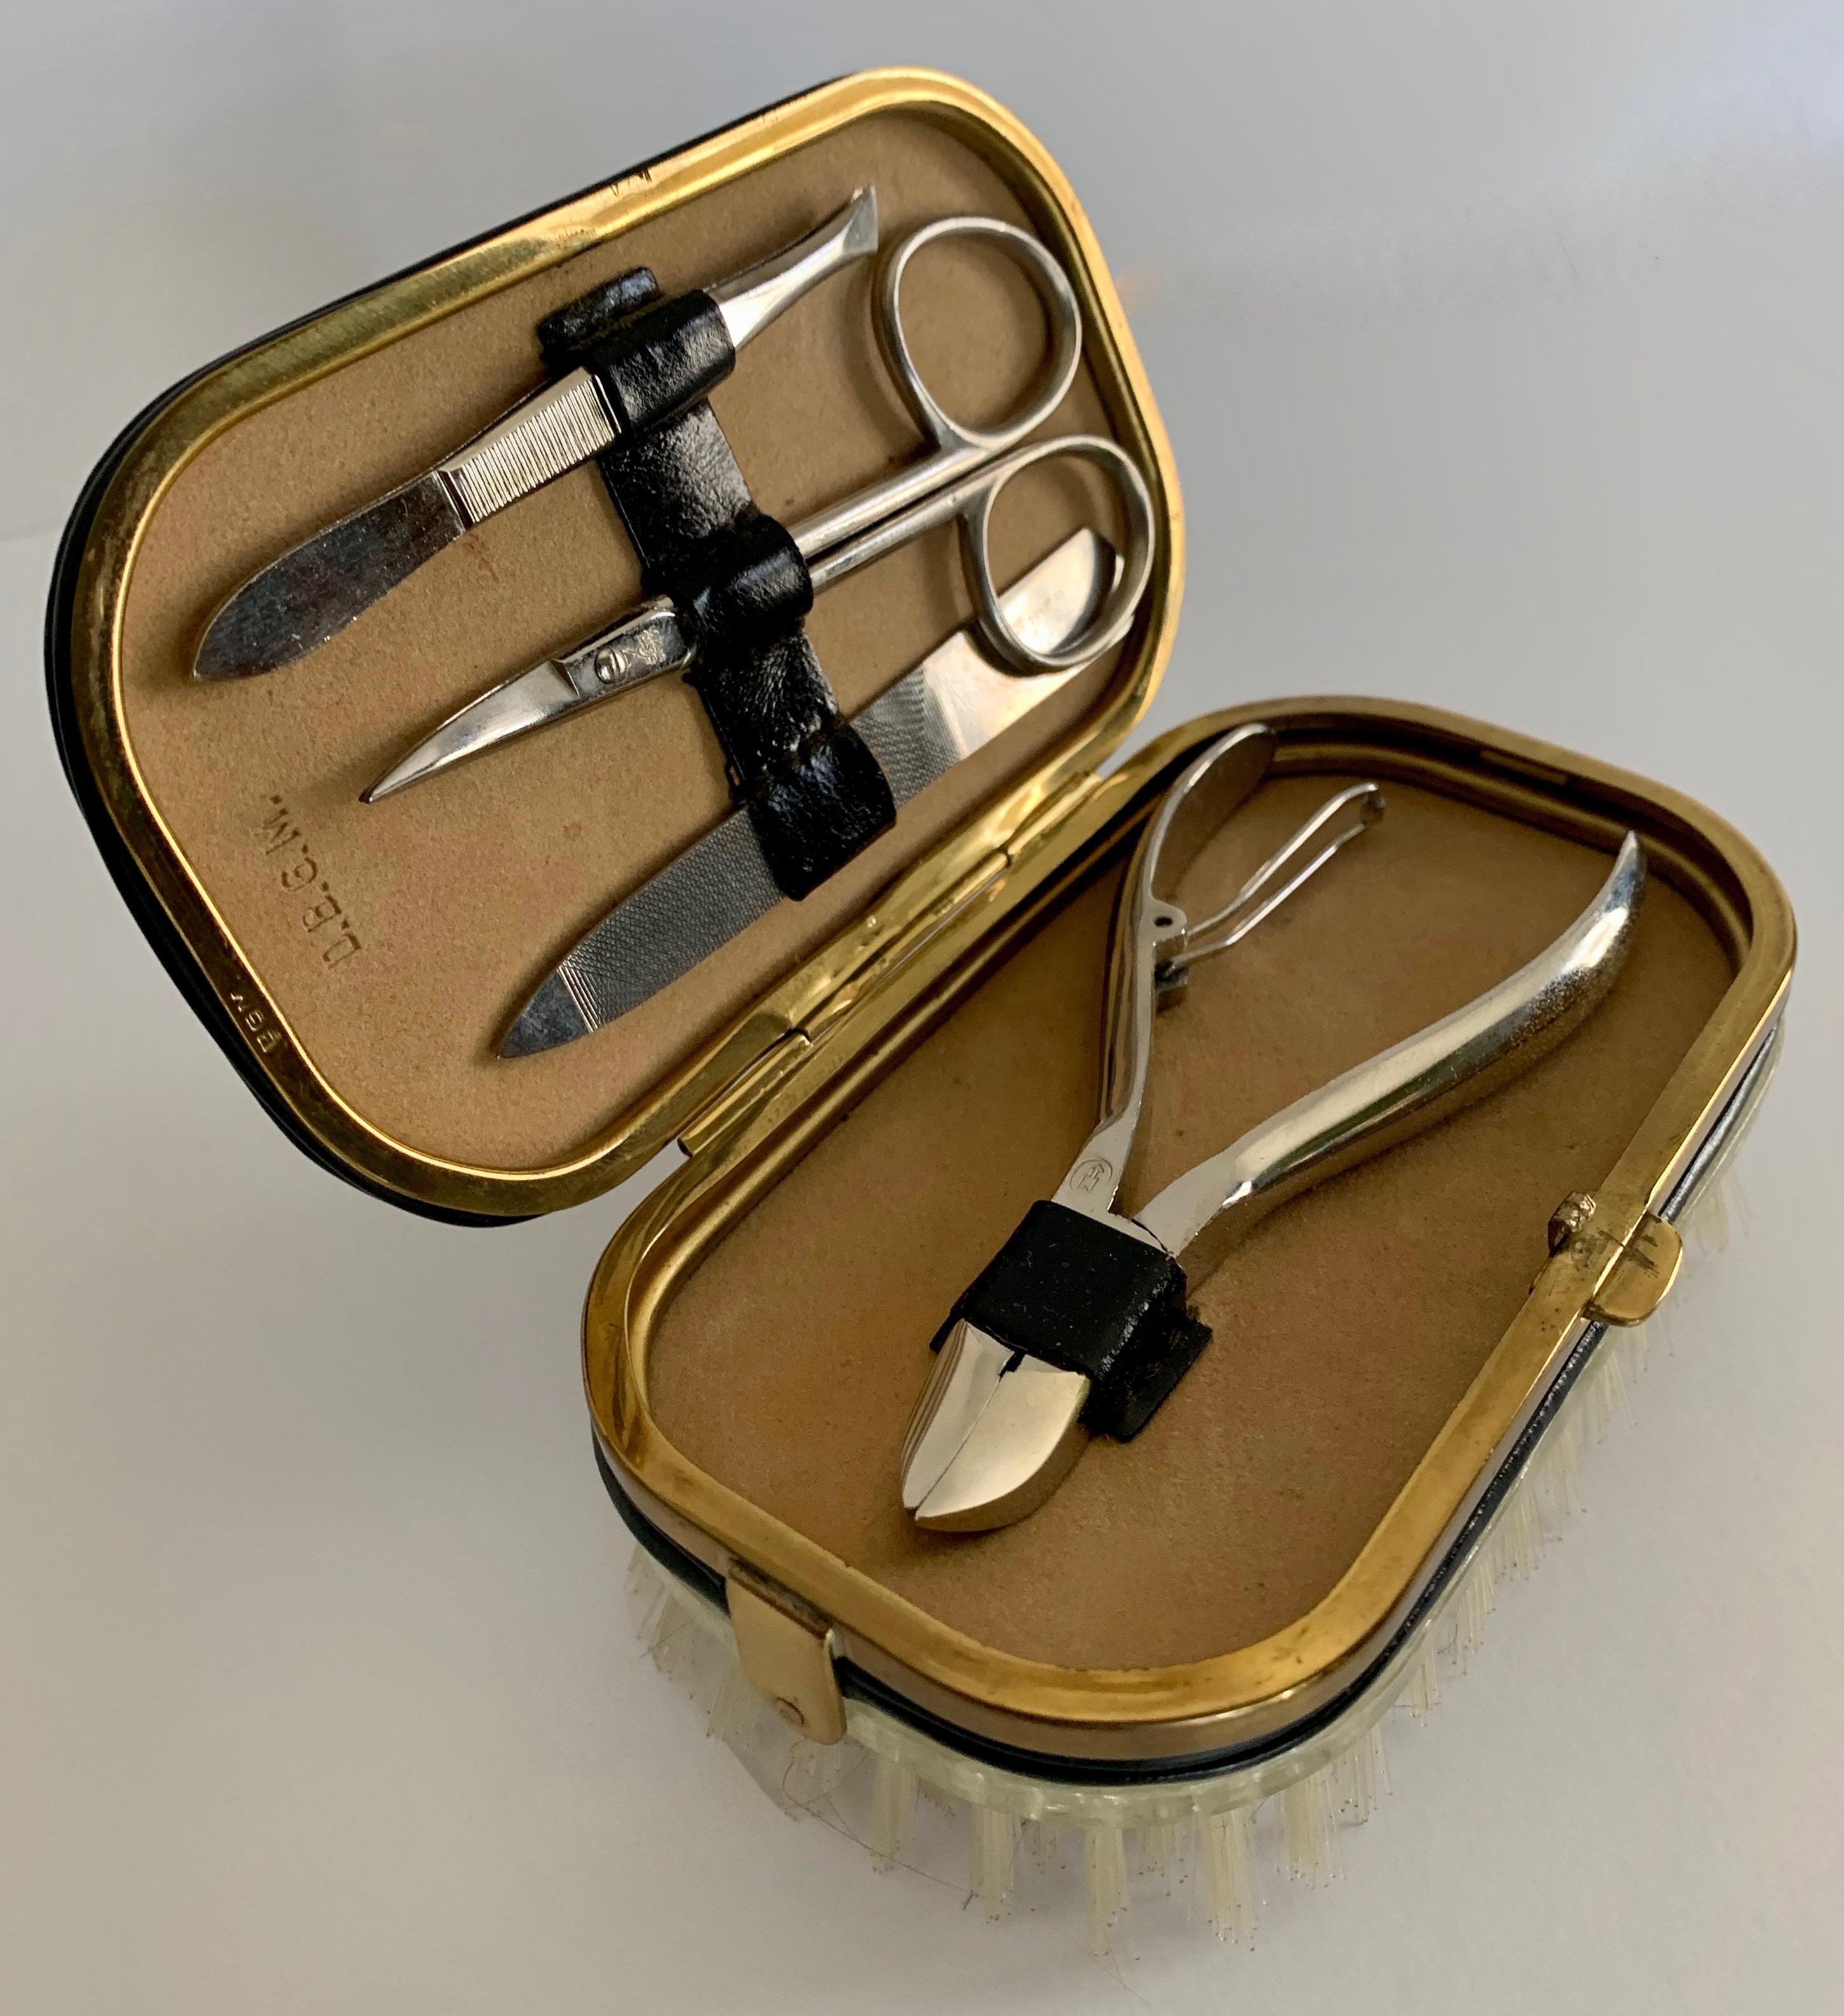 A handsome compliment to the men's dressing table, dressing room or Valet. The attractive Garment brush, with brass trim, and clasp opens to reveal a file, nail cutter, cuticle scissors & tweezers. Additionally, the brush is removable and a small